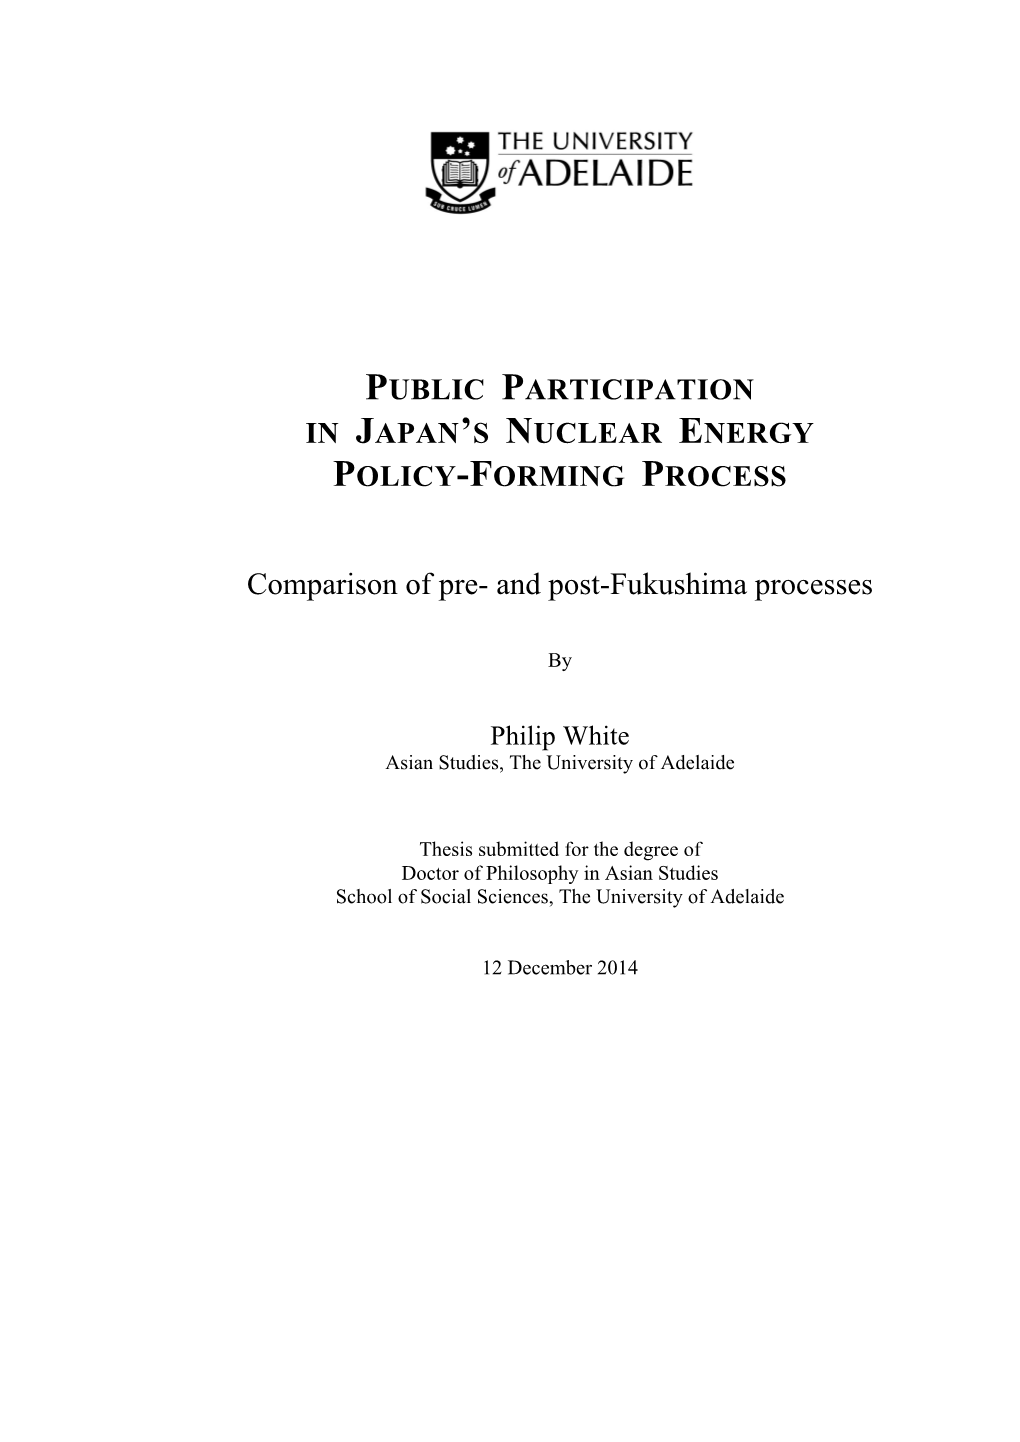 Public Participation in Japan's Nuclear Energy Policy-Forming Process